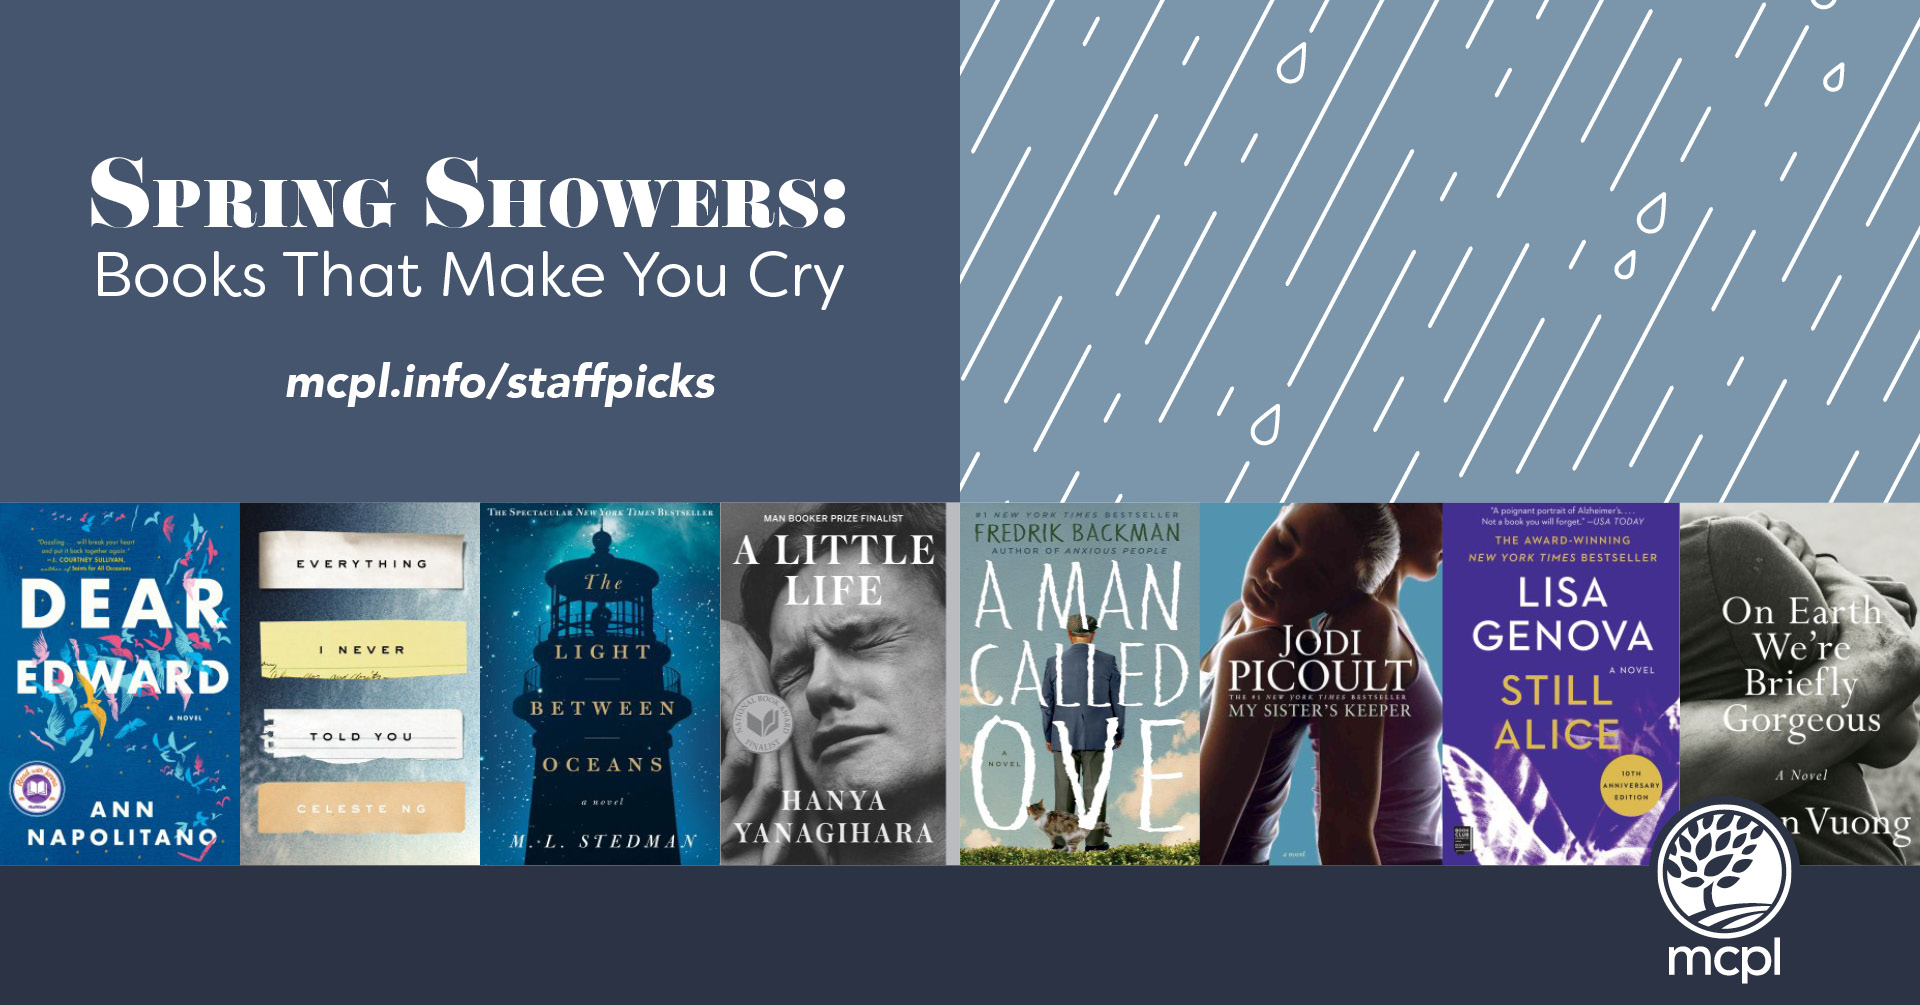 Spring Showers: Books That Make You Cry